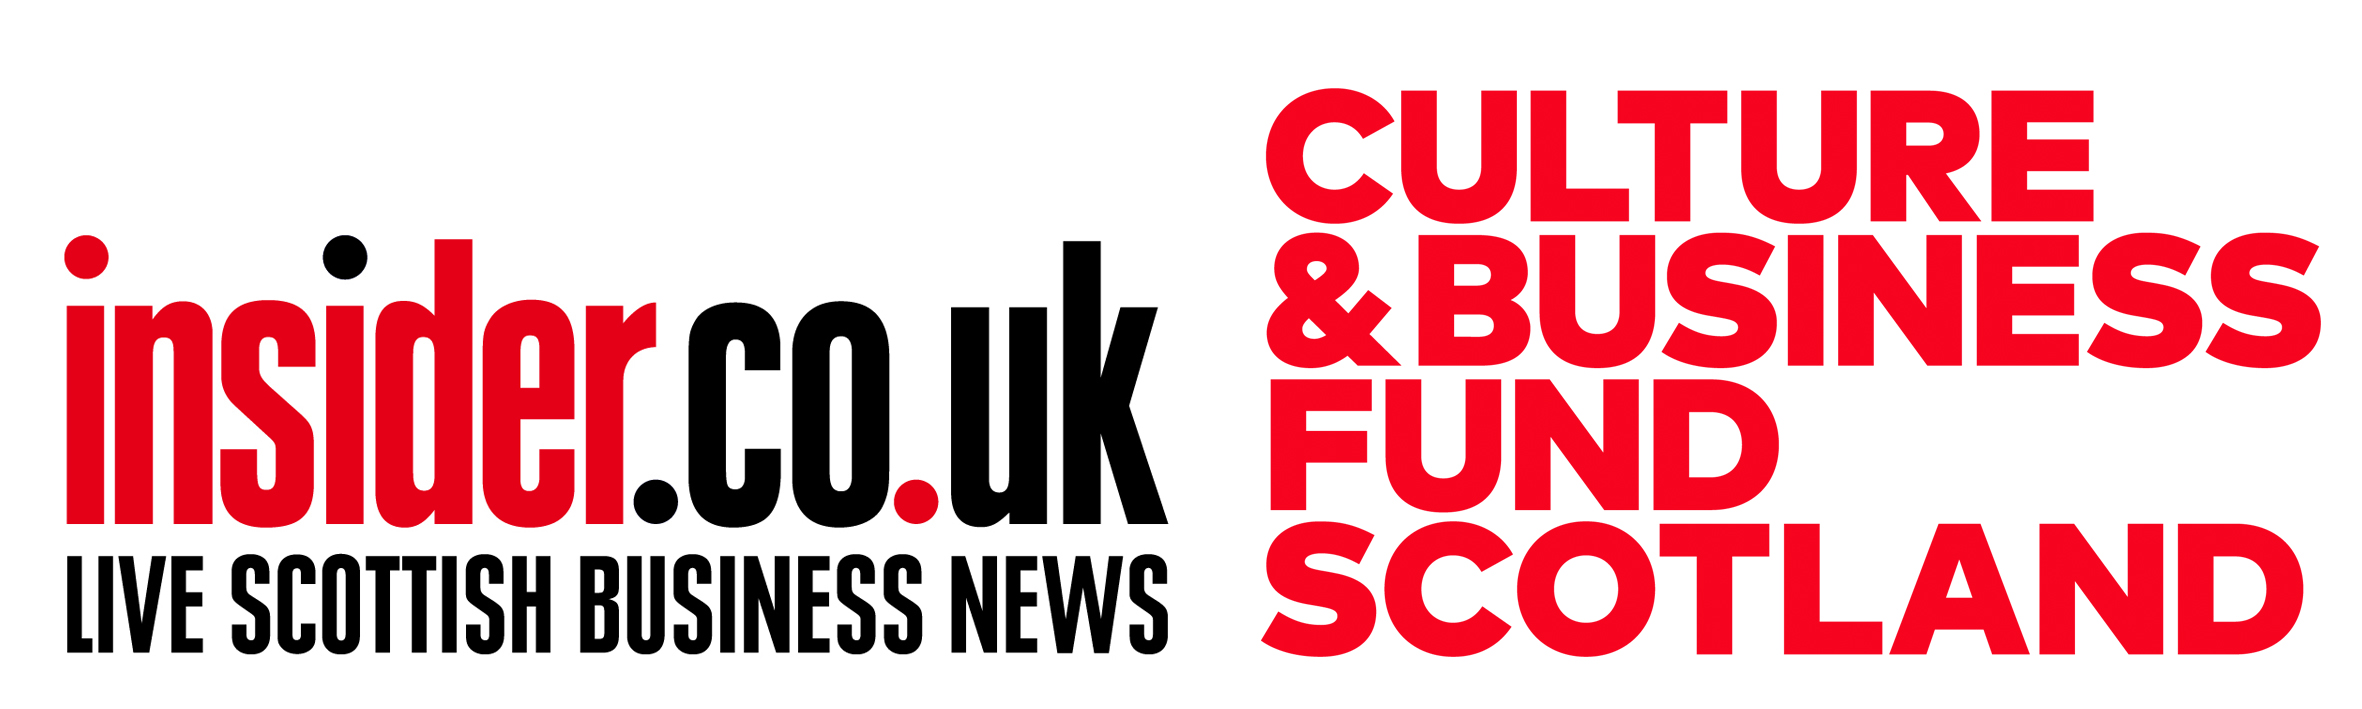 Black and red wording in upper and lower case reading insider.co.uk live Scottish business news Culture and Business Fund Scotland